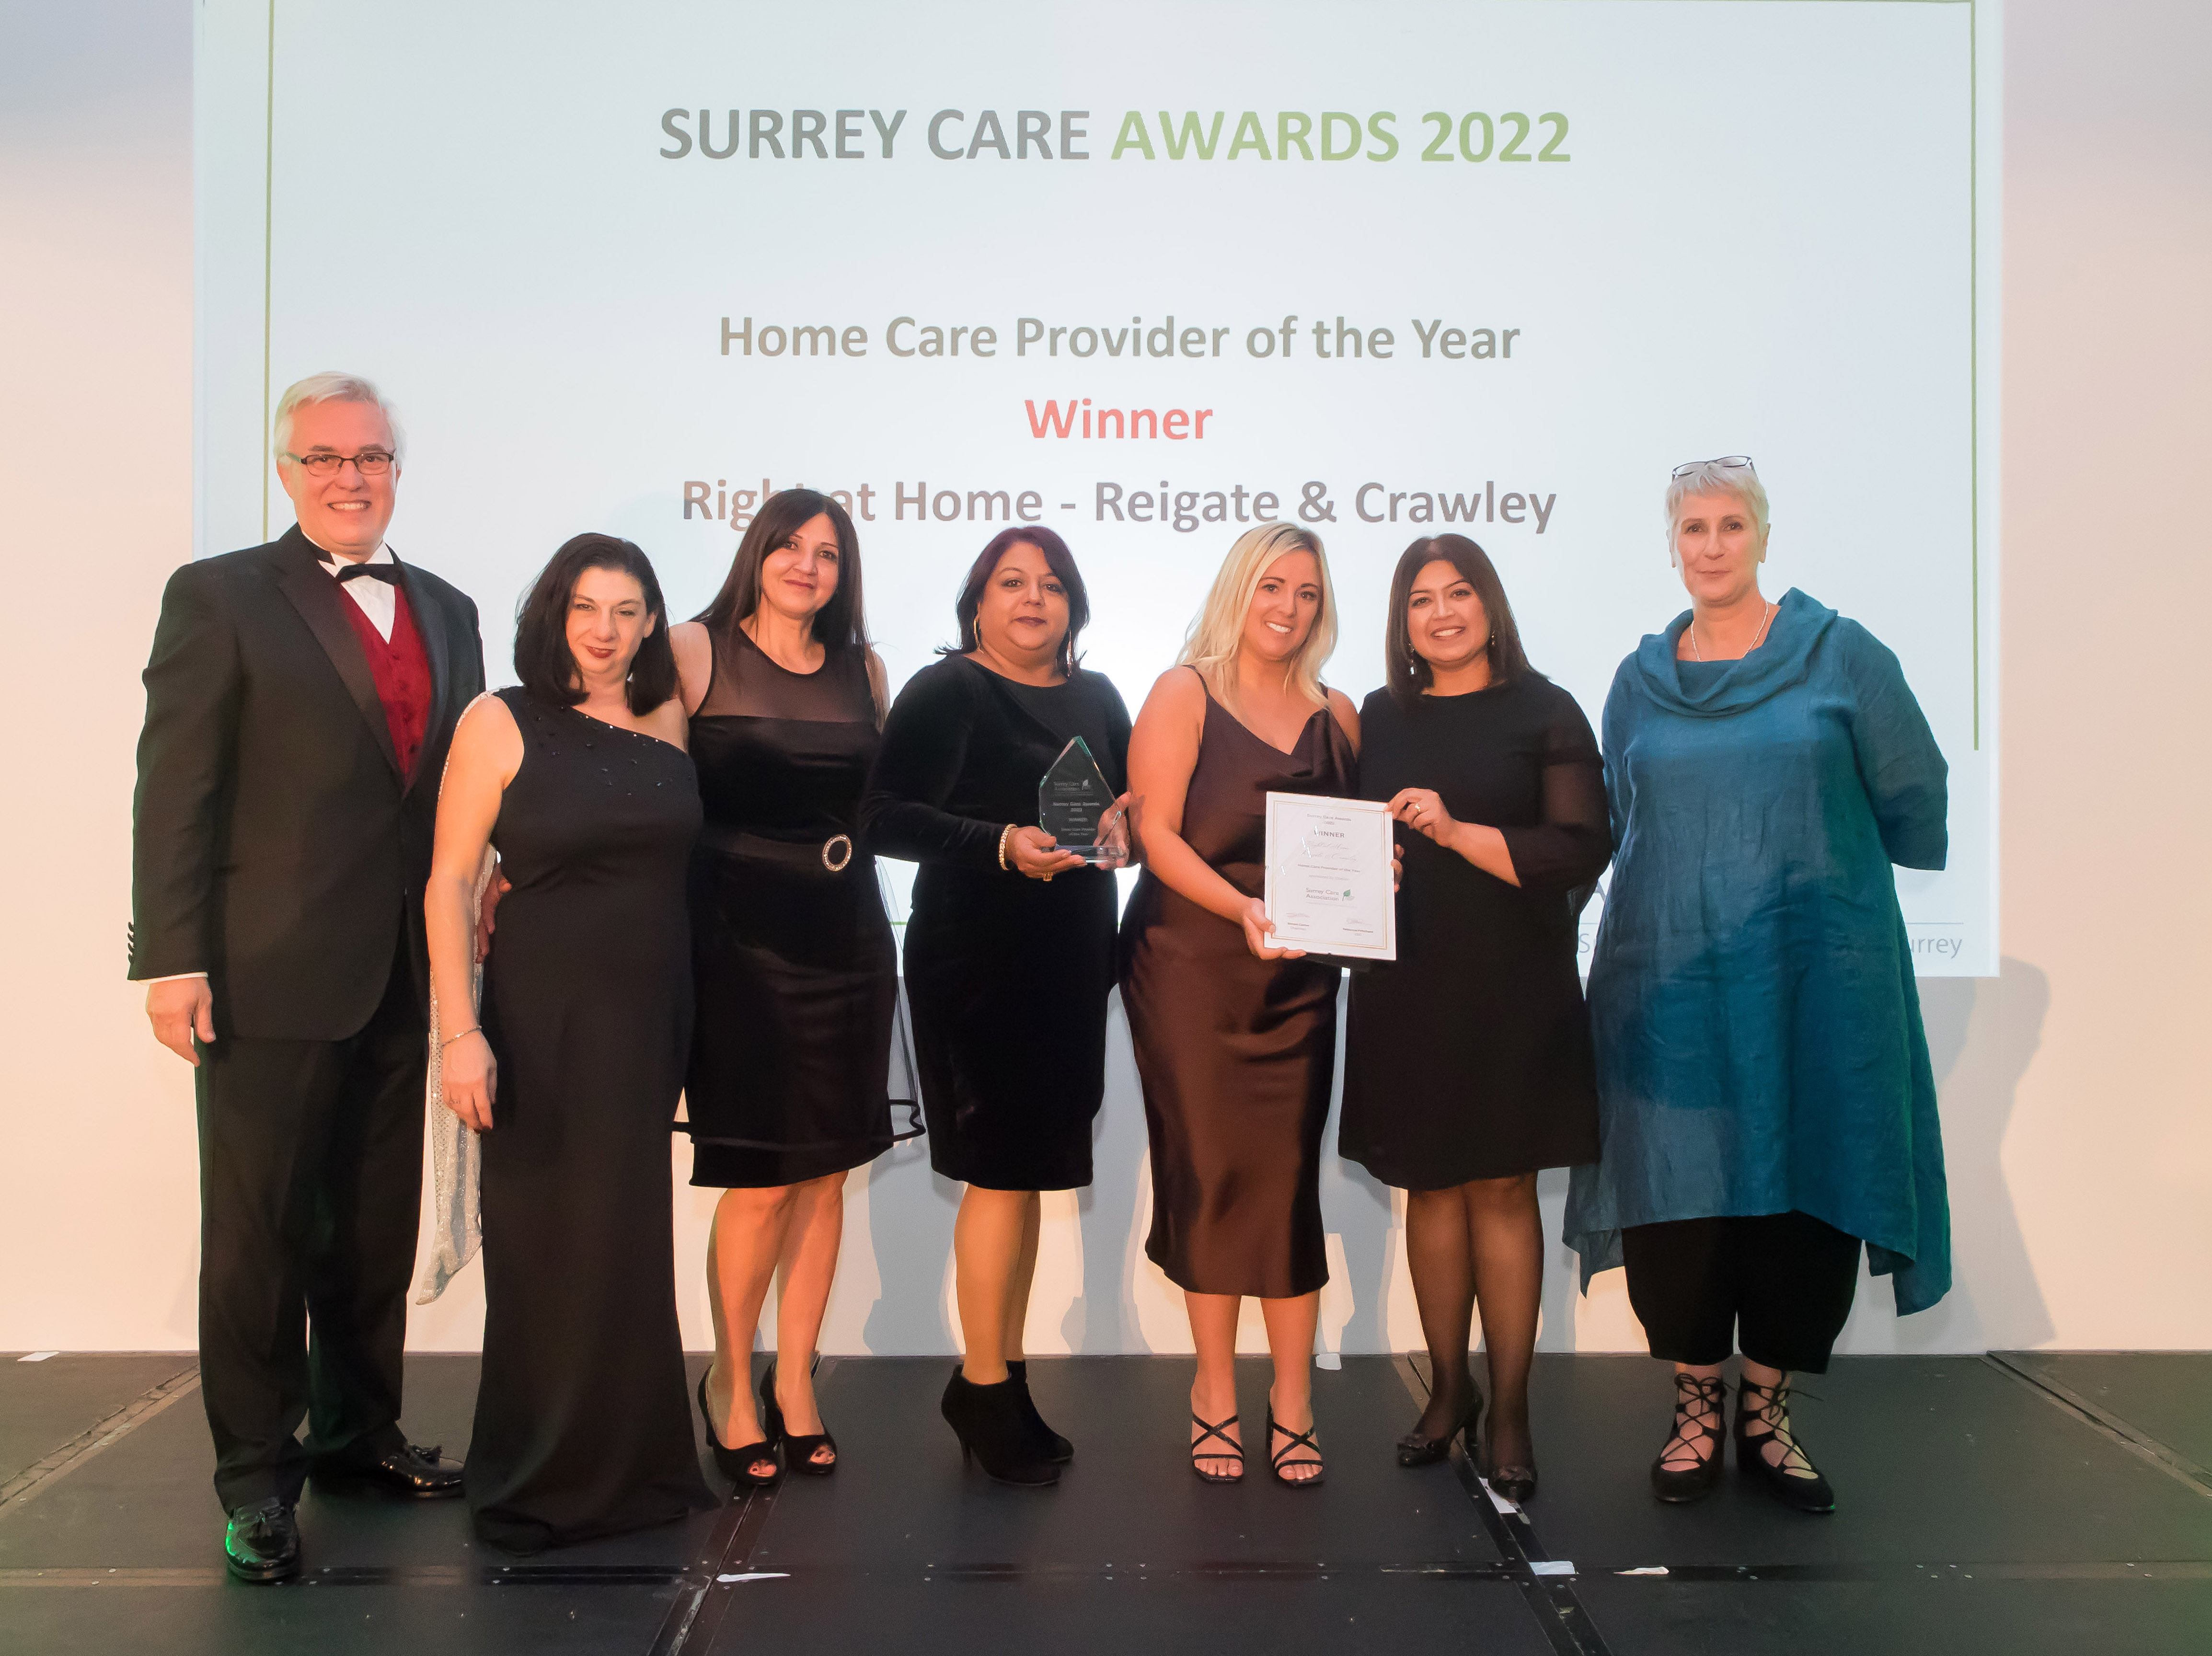 Home Care Provider of the Year 2022 